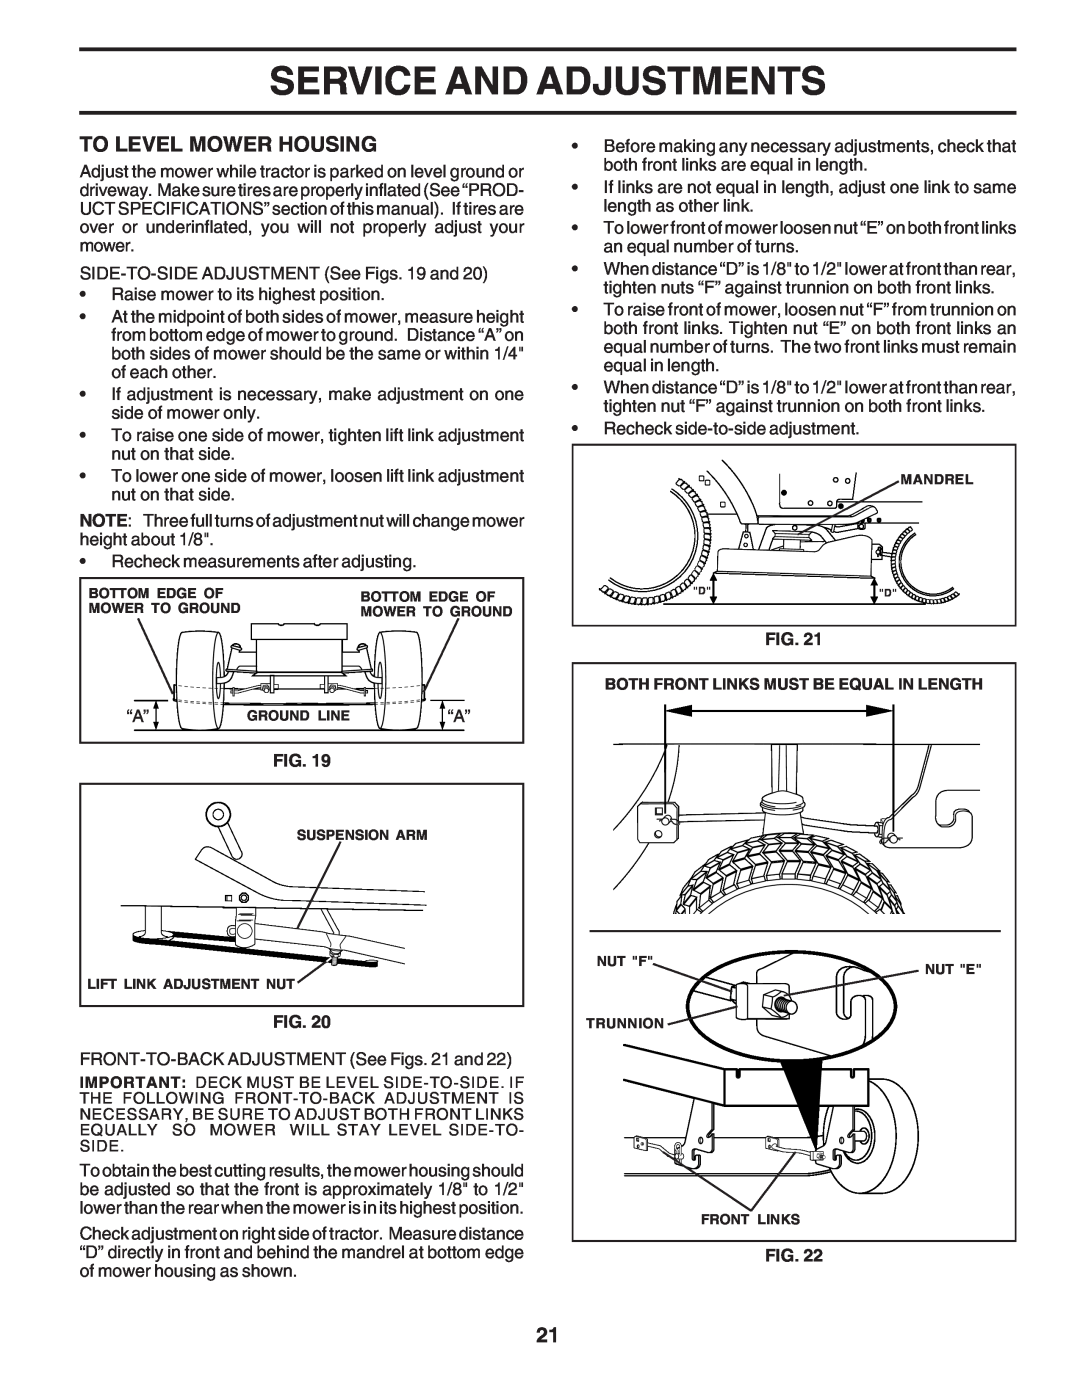 Poulan PPR20H42STB owner manual To Level Mower Housing, Service And Adjustments, Both Front Links Must Be Equal In Length 